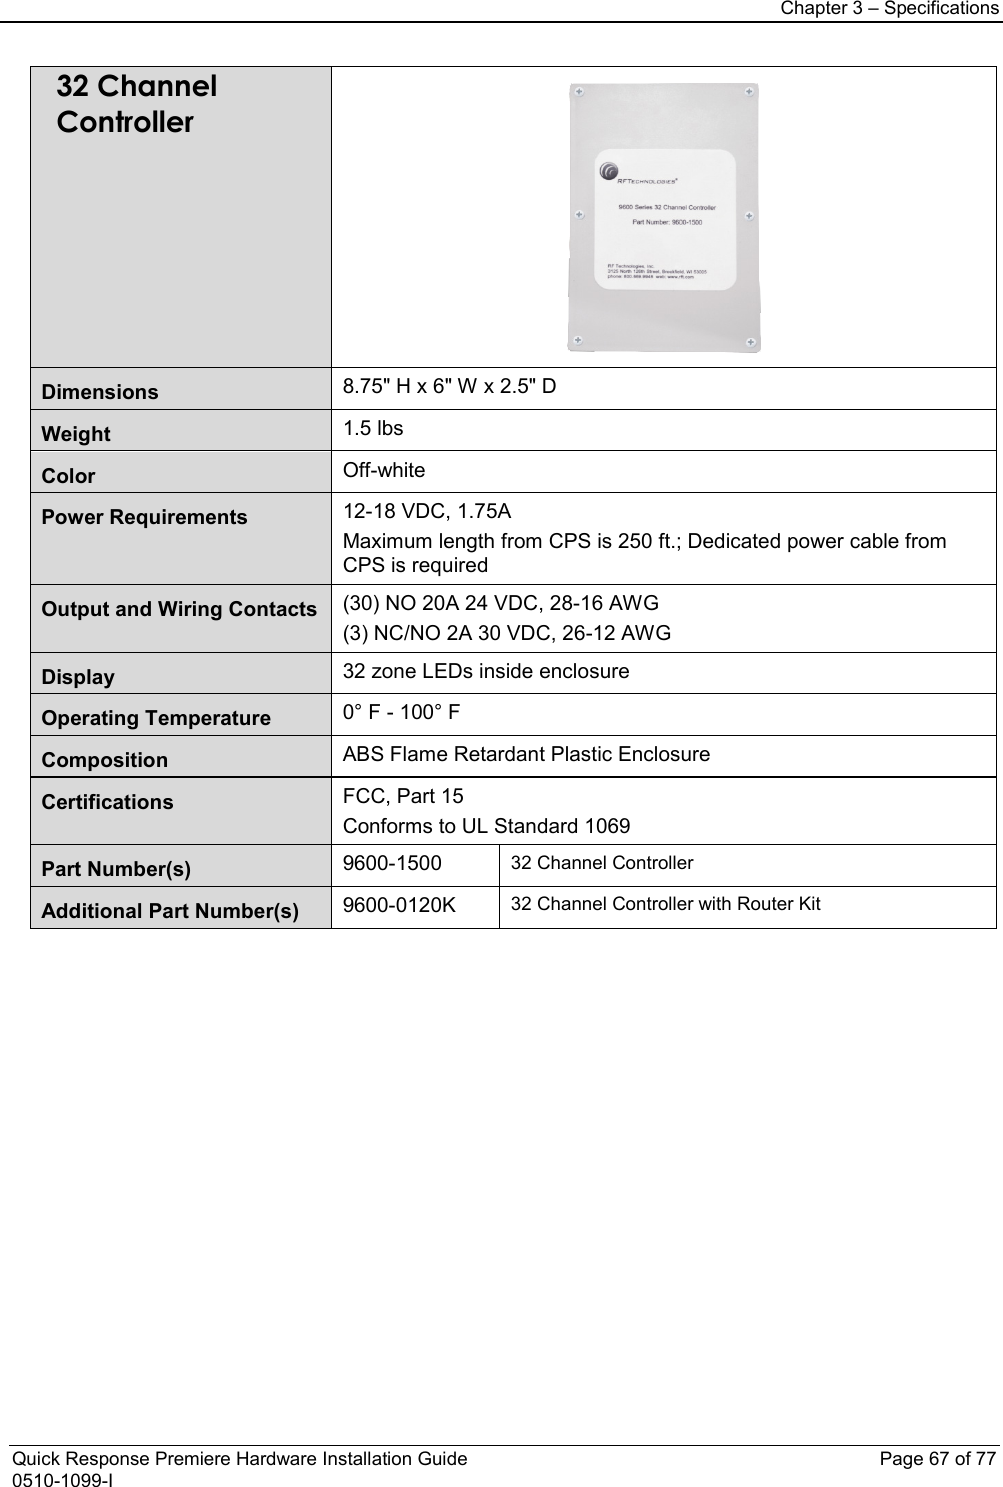 Chapter 3 – Specifications  Quick Response Premiere Hardware Installation Guide    Page 67 of 77 0510-1099-I 32 Channel Controller  Dimensions 8.75&quot; H x 6&quot; W x 2.5&quot; D Weight 1.5 lbs Color Off-white Power Requirements 12-18 VDC, 1.75A Maximum length from CPS is 250 ft.; Dedicated power cable from CPS is required Output and Wiring Contacts (30) NO 20A 24 VDC, 28-16 AWG (3) NC/NO 2A 30 VDC, 26-12 AWG Display 32 zone LEDs inside enclosure Operating Temperature 0° F - 100° F Composition ABS Flame Retardant Plastic Enclosure Certifications FCC, Part 15 Conforms to UL Standard 1069 Part Number(s)  9600-1500 32 Channel Controller Additional Part Number(s) 9600-0120K 32 Channel Controller with Router Kit                          